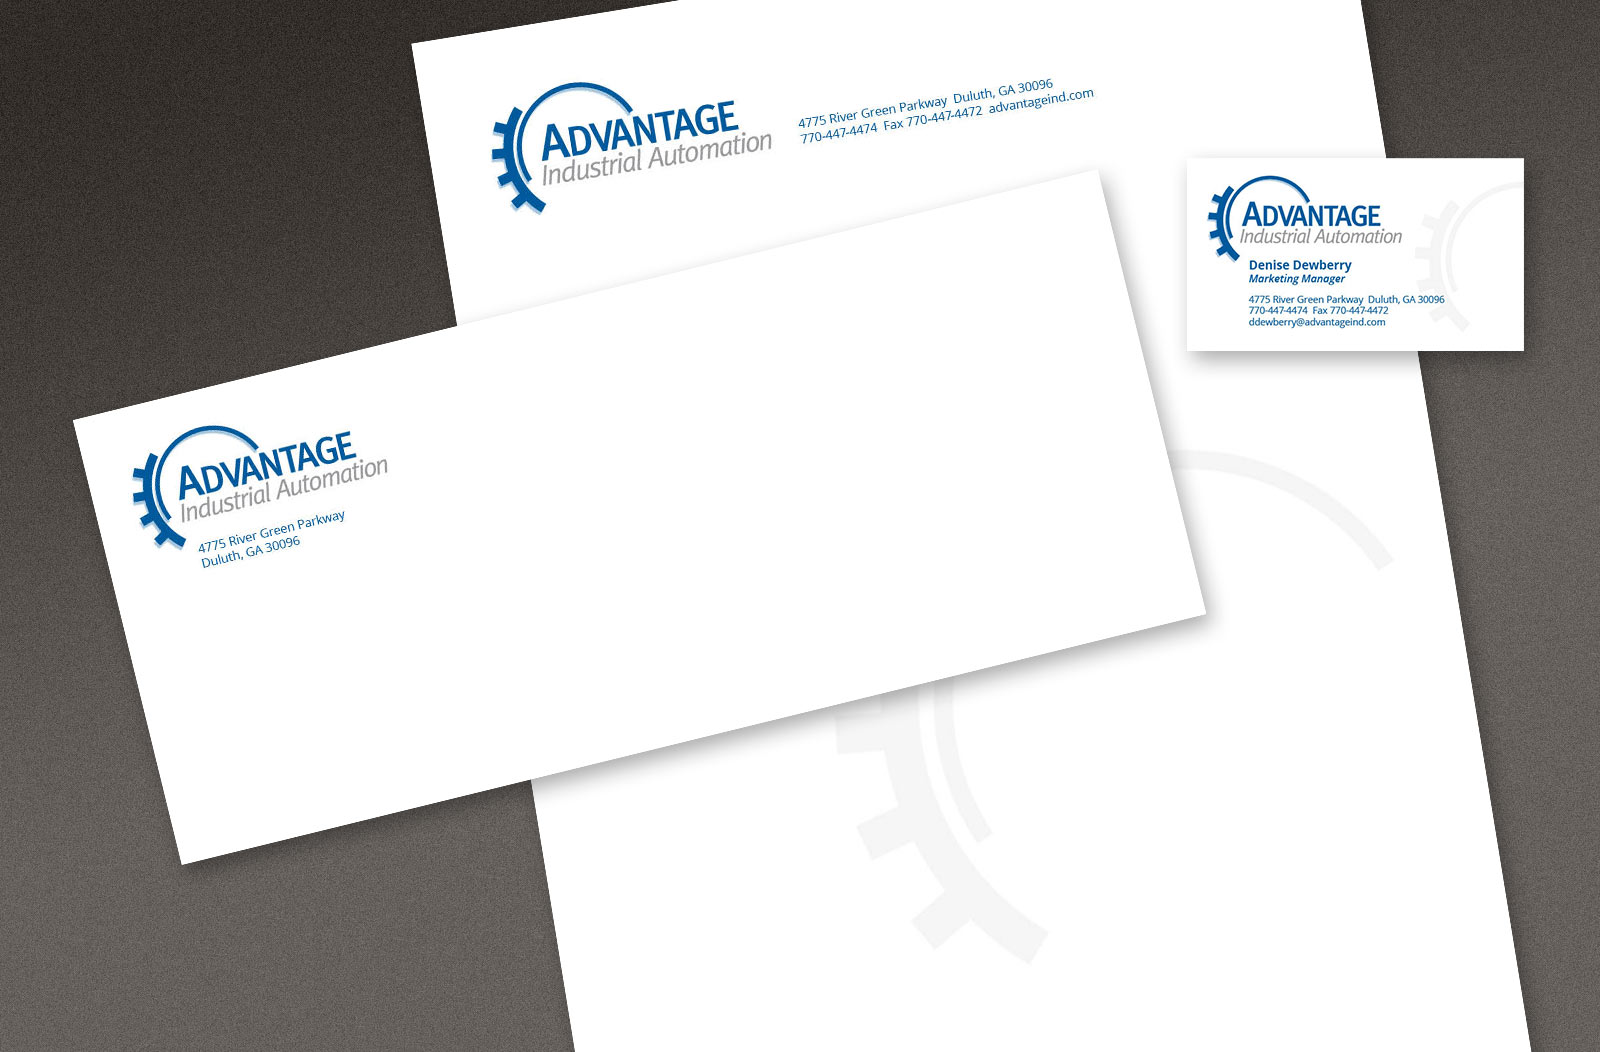 Adv Industrial Automation letterhead, business card & envelope